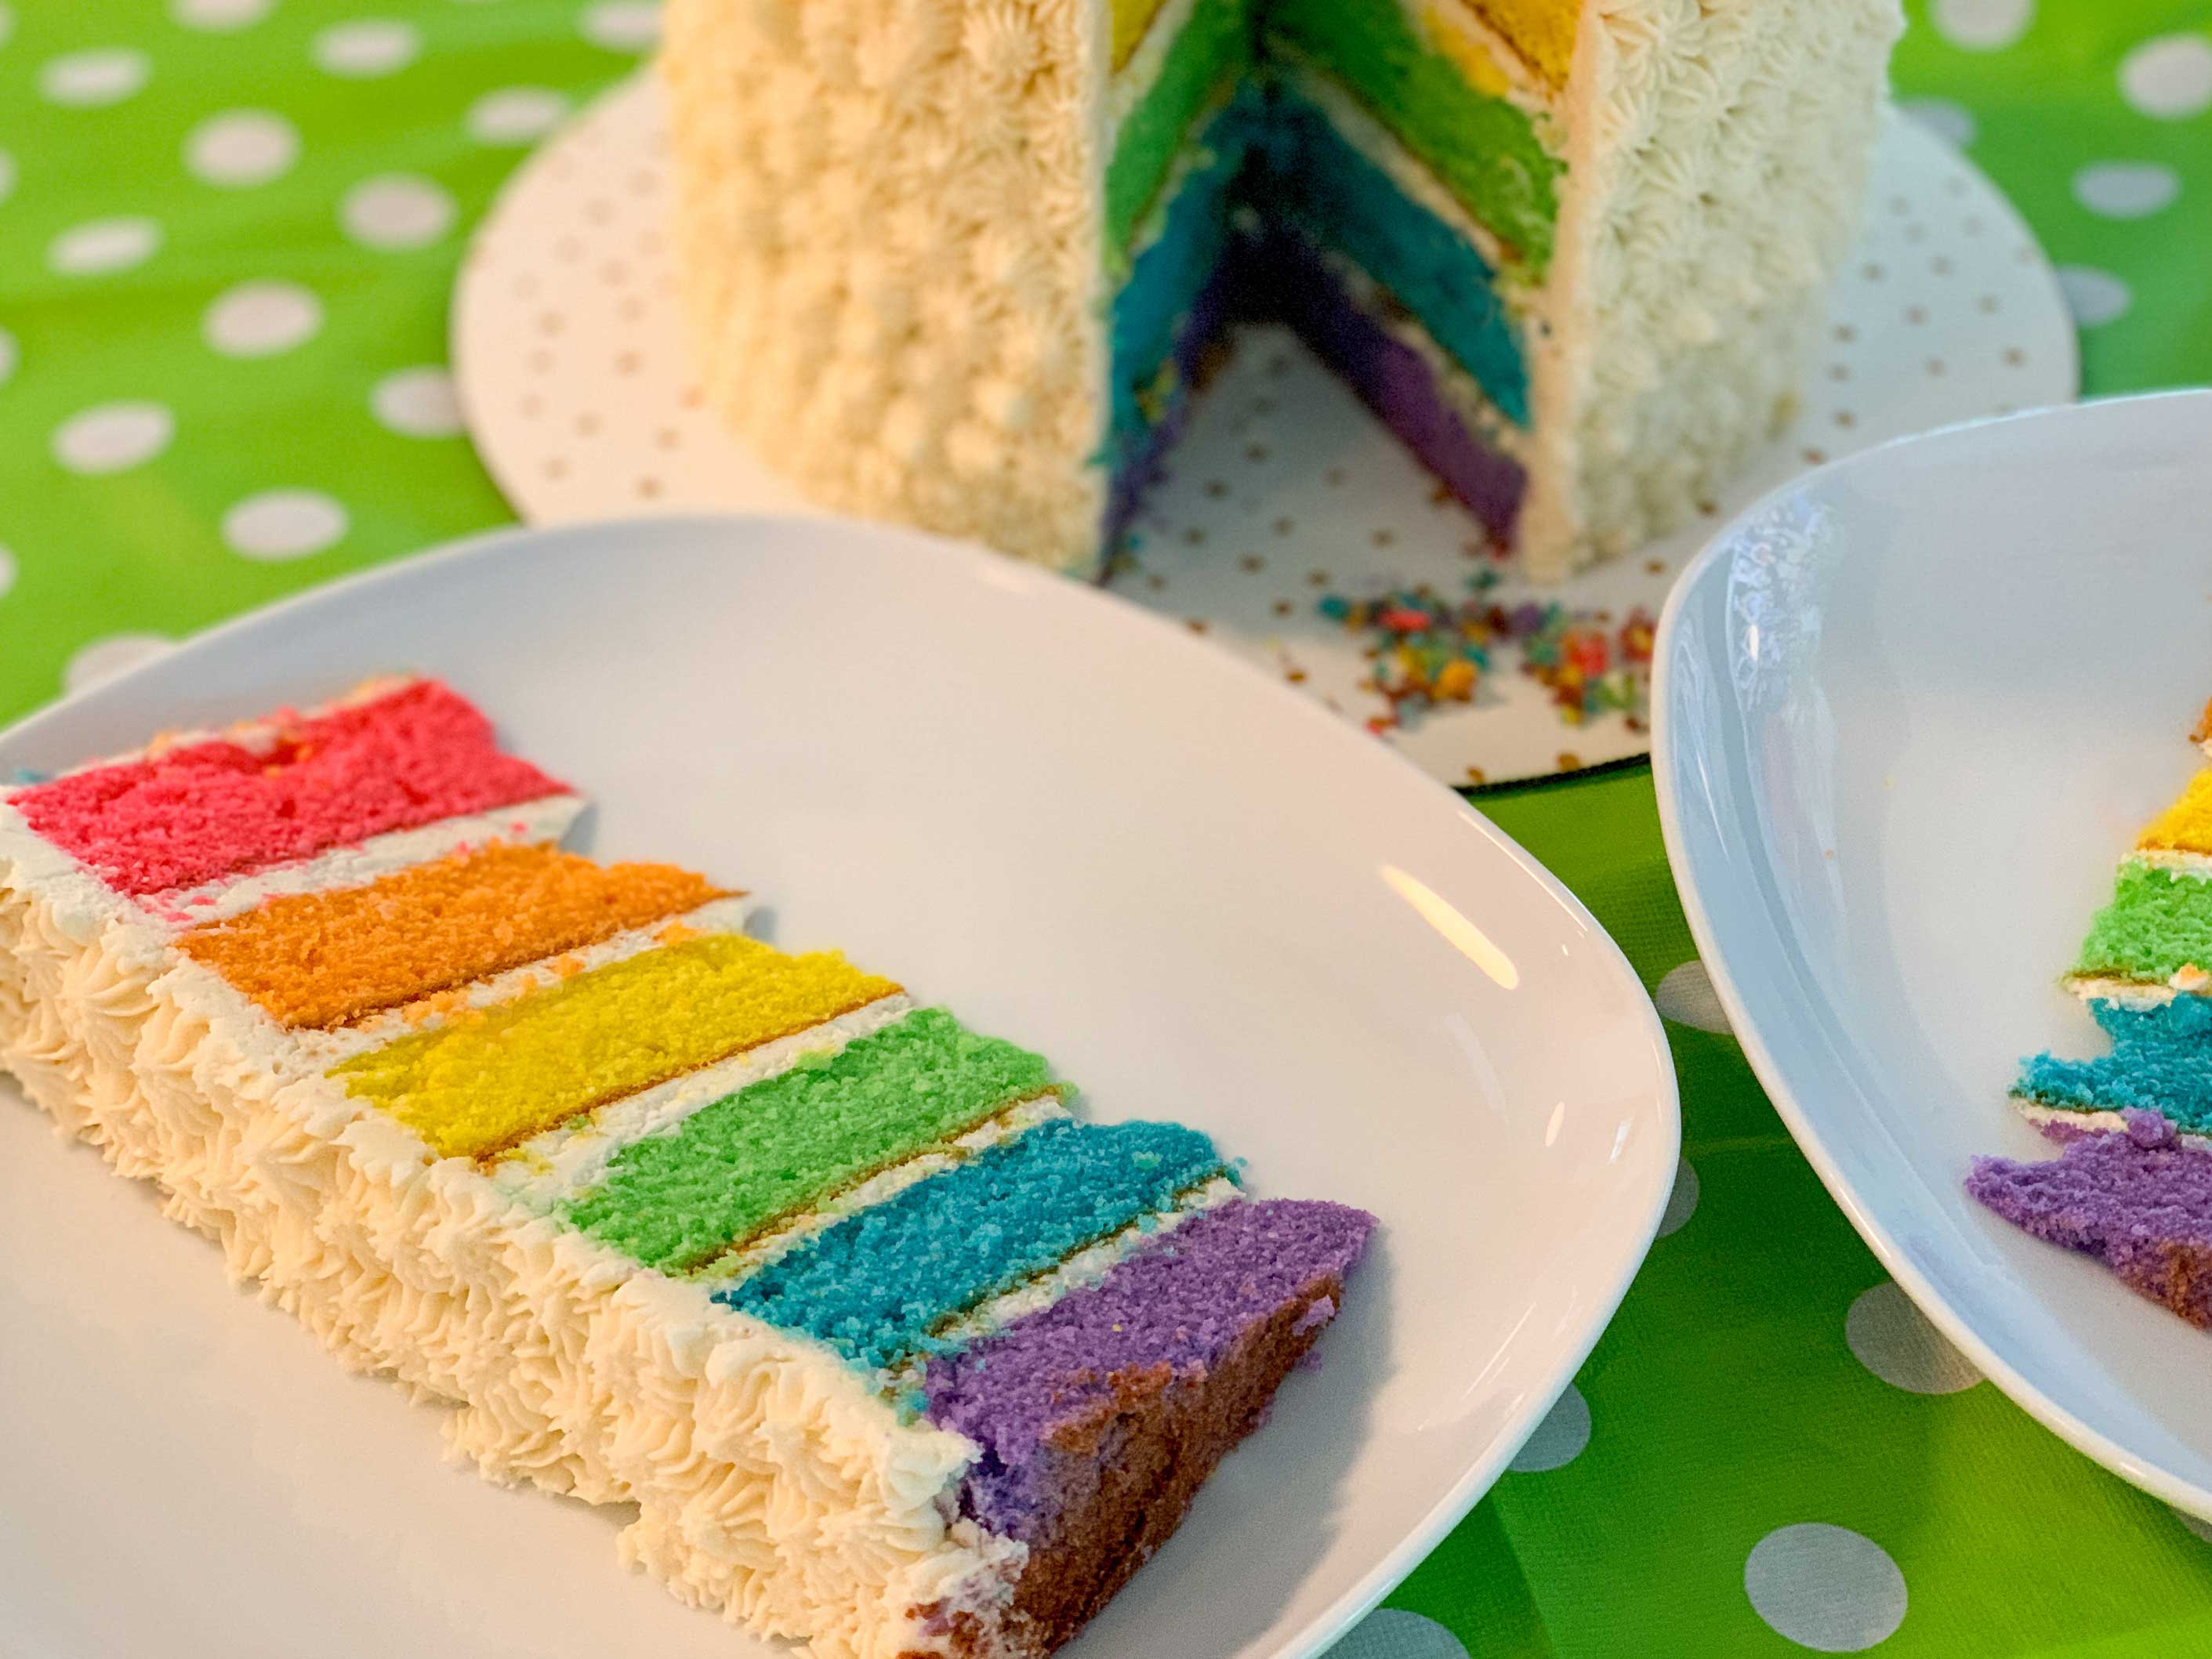 close up shot of a slice of the rainbow cake